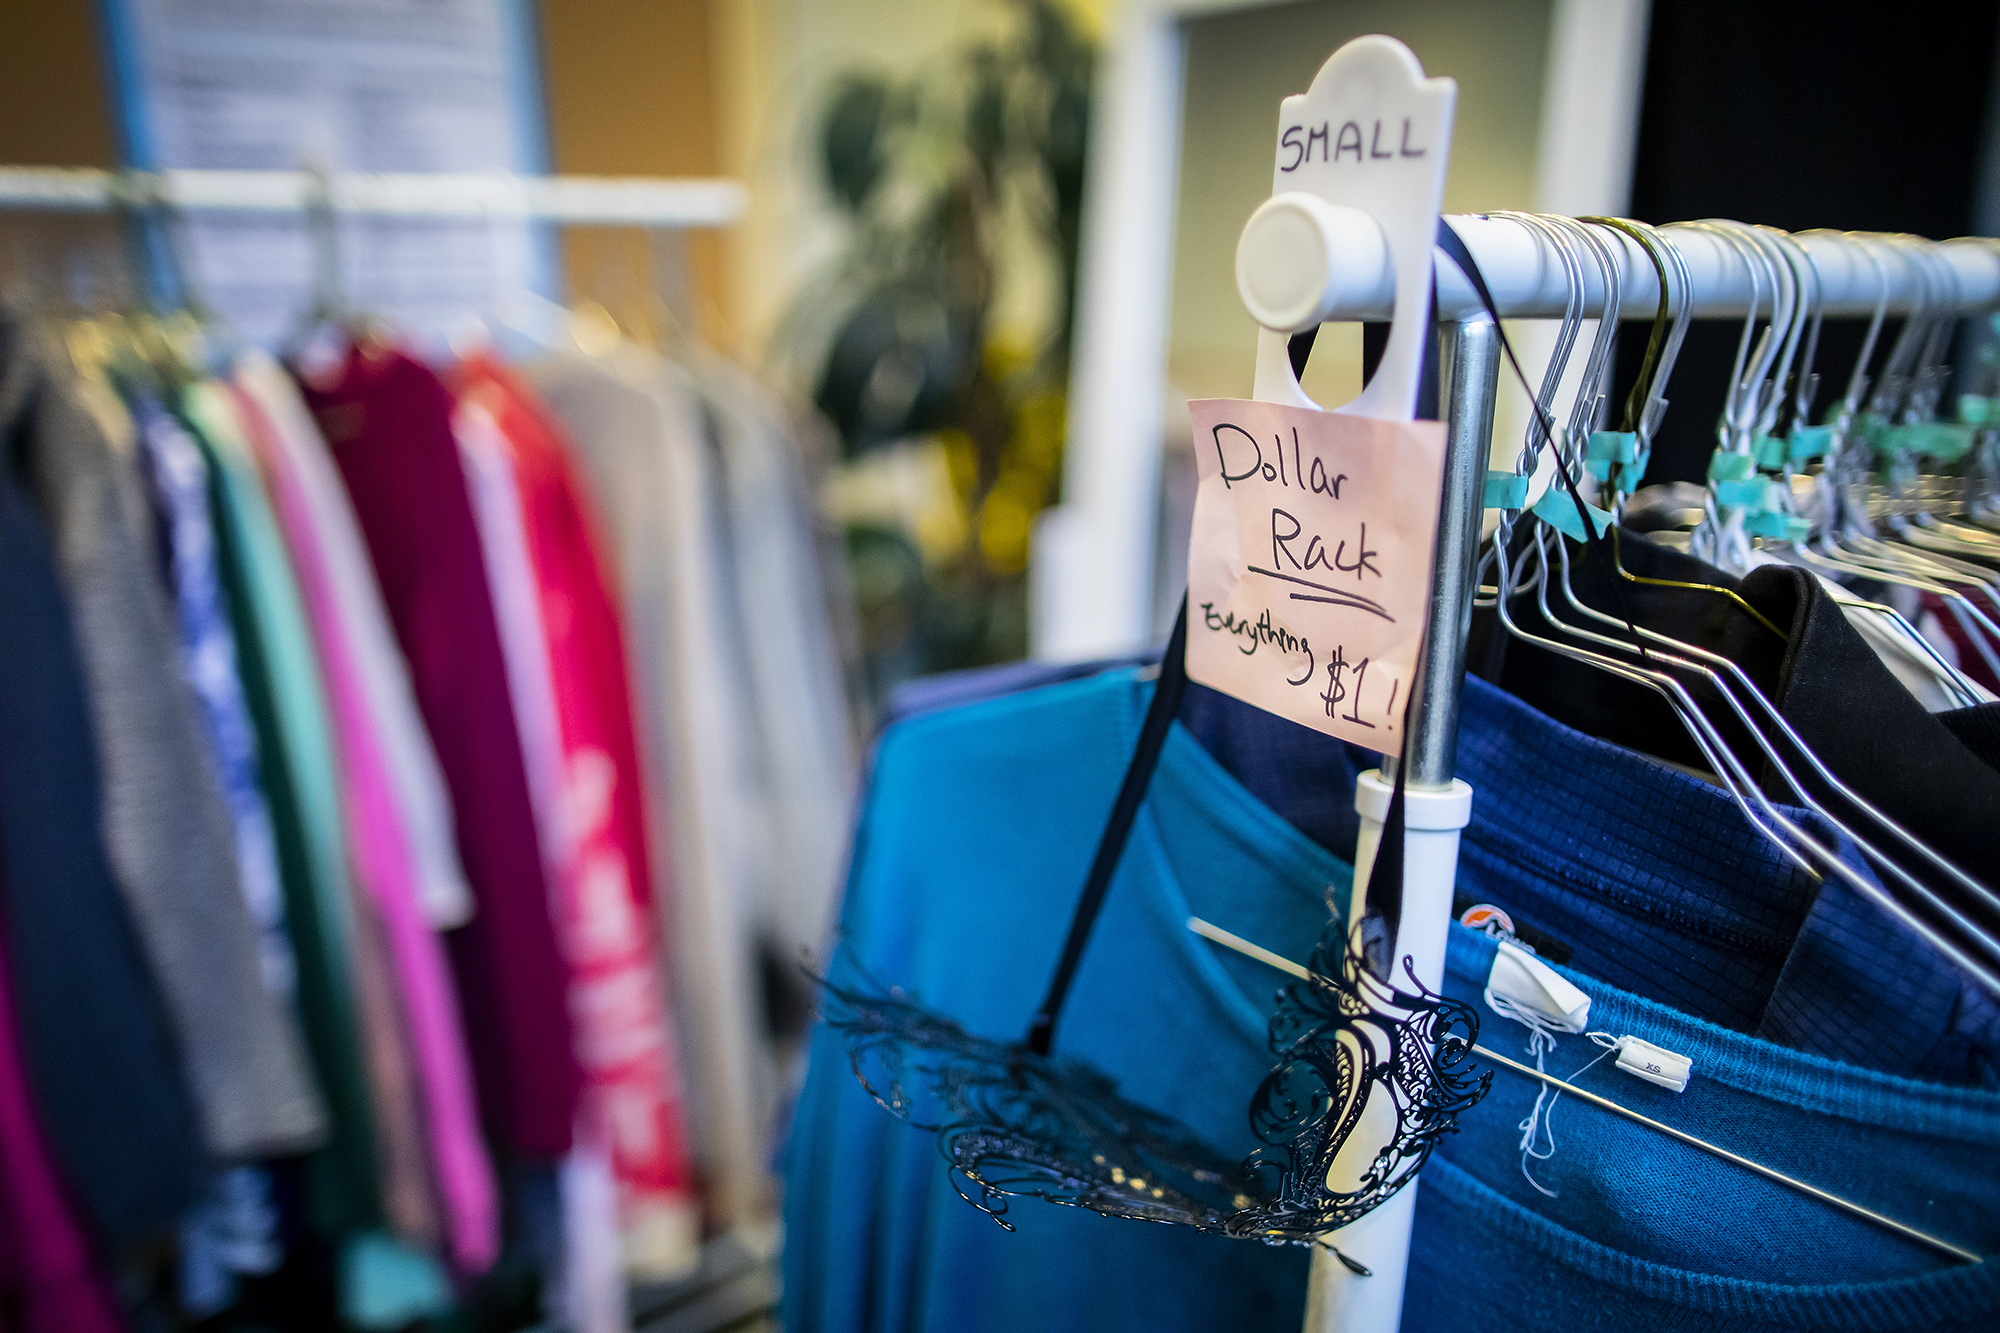 A rack of clothes in the foreground says "Dollar Rack: Everything $1!" and "Small" up top. In the background is another clothing rack, blurred out.